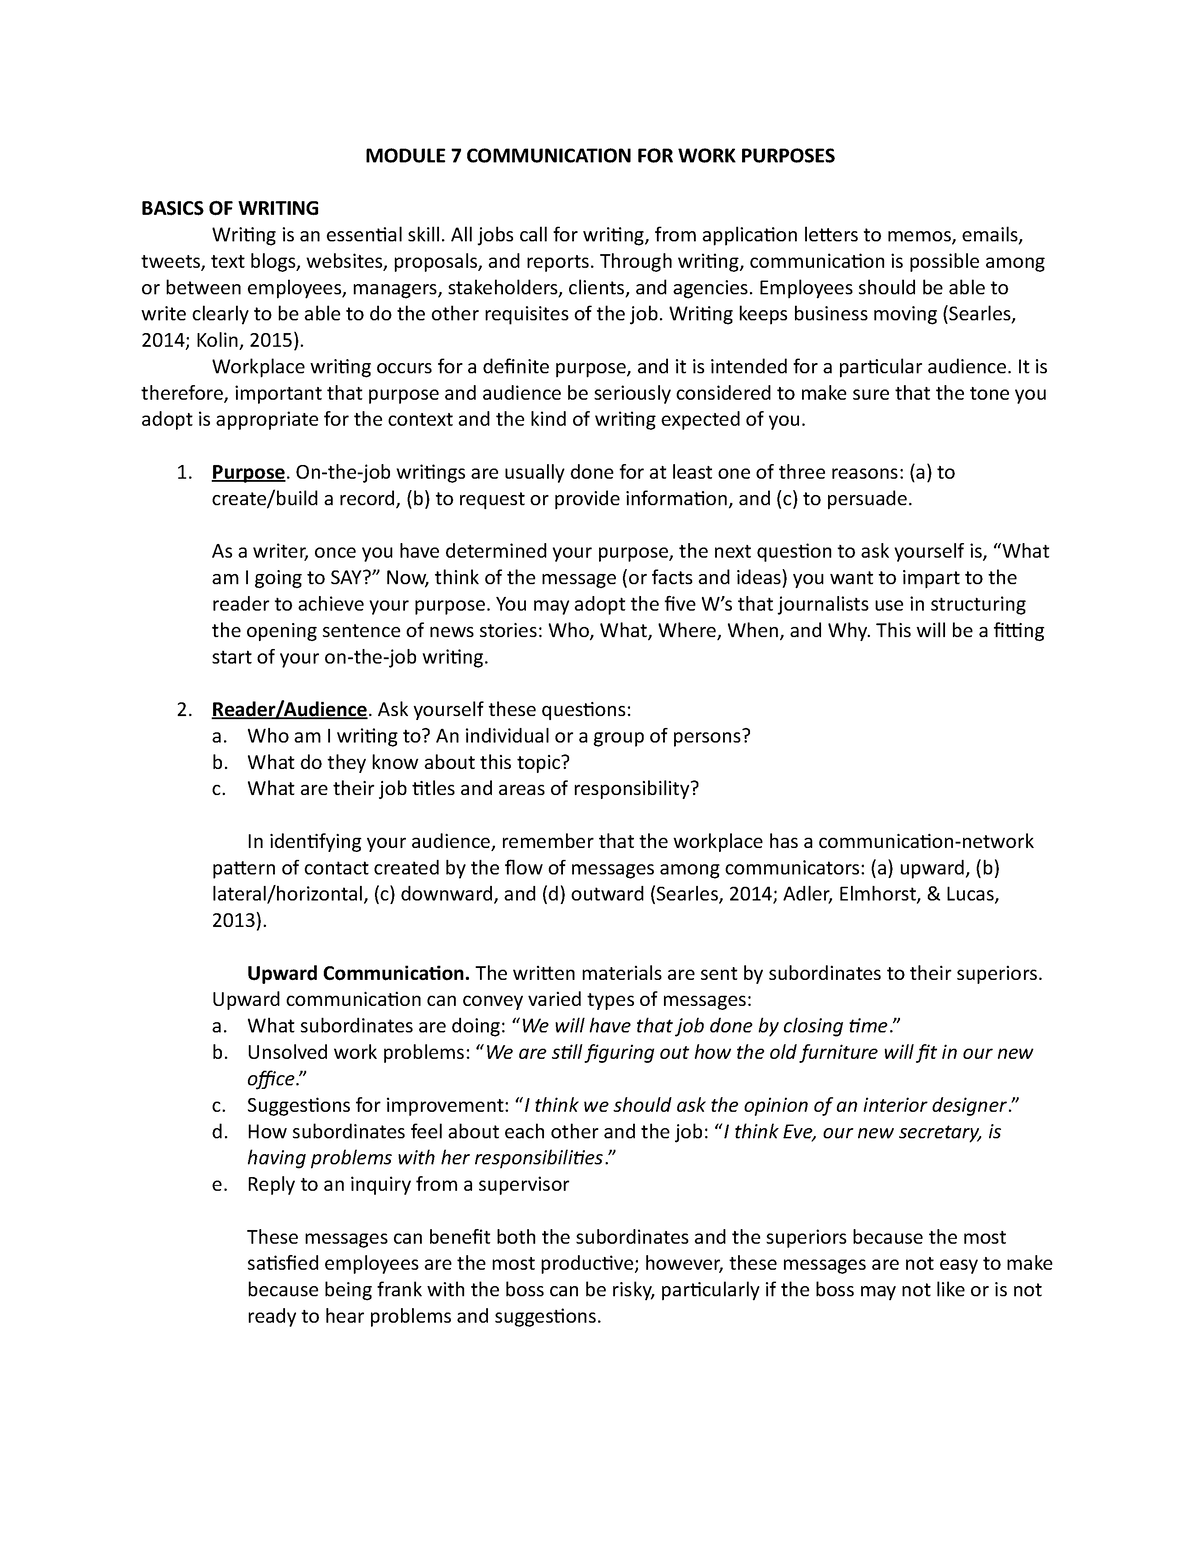 communication for work purposes essay